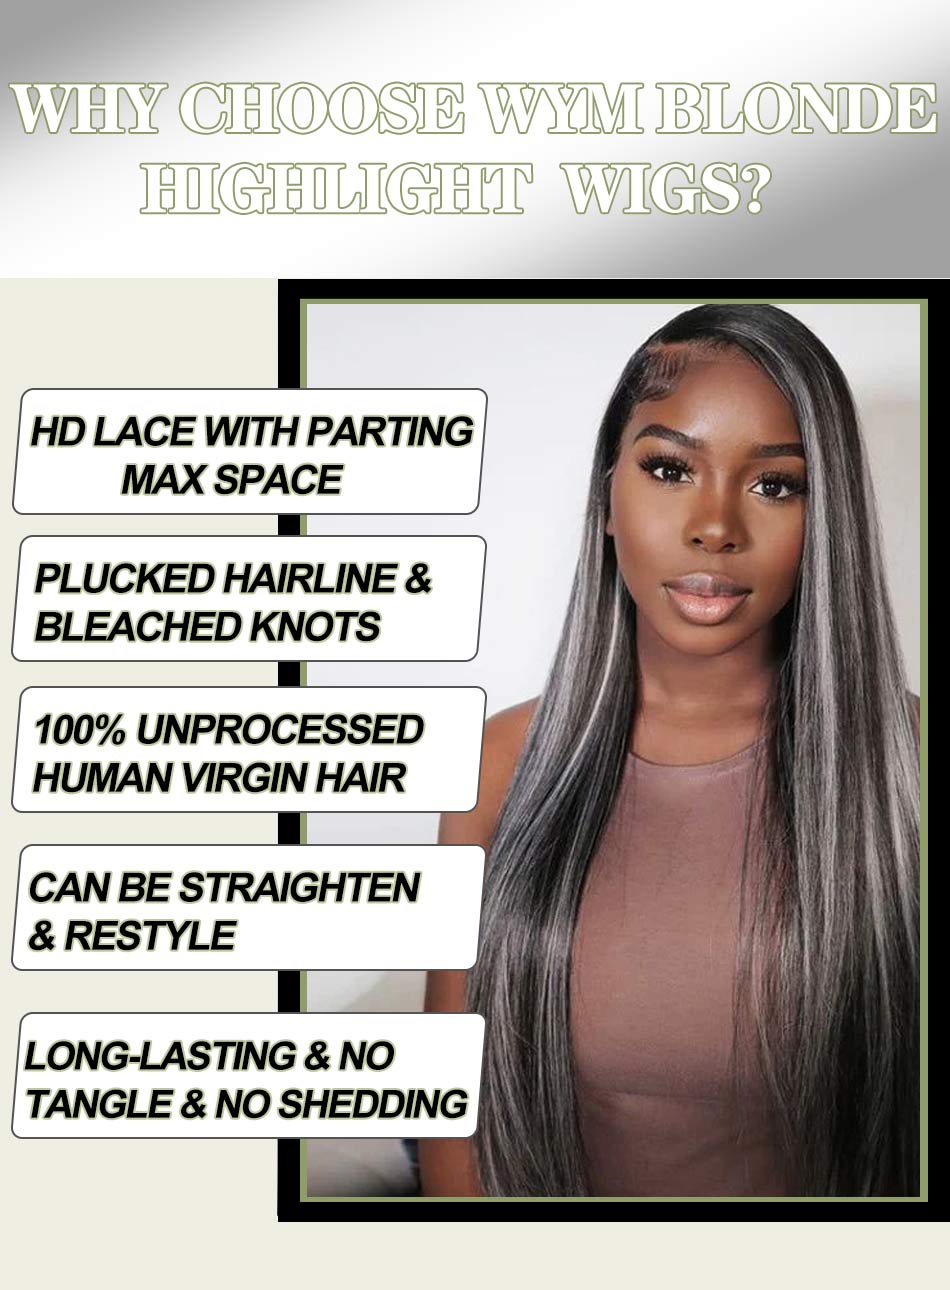 hd lace blonde highlight wig